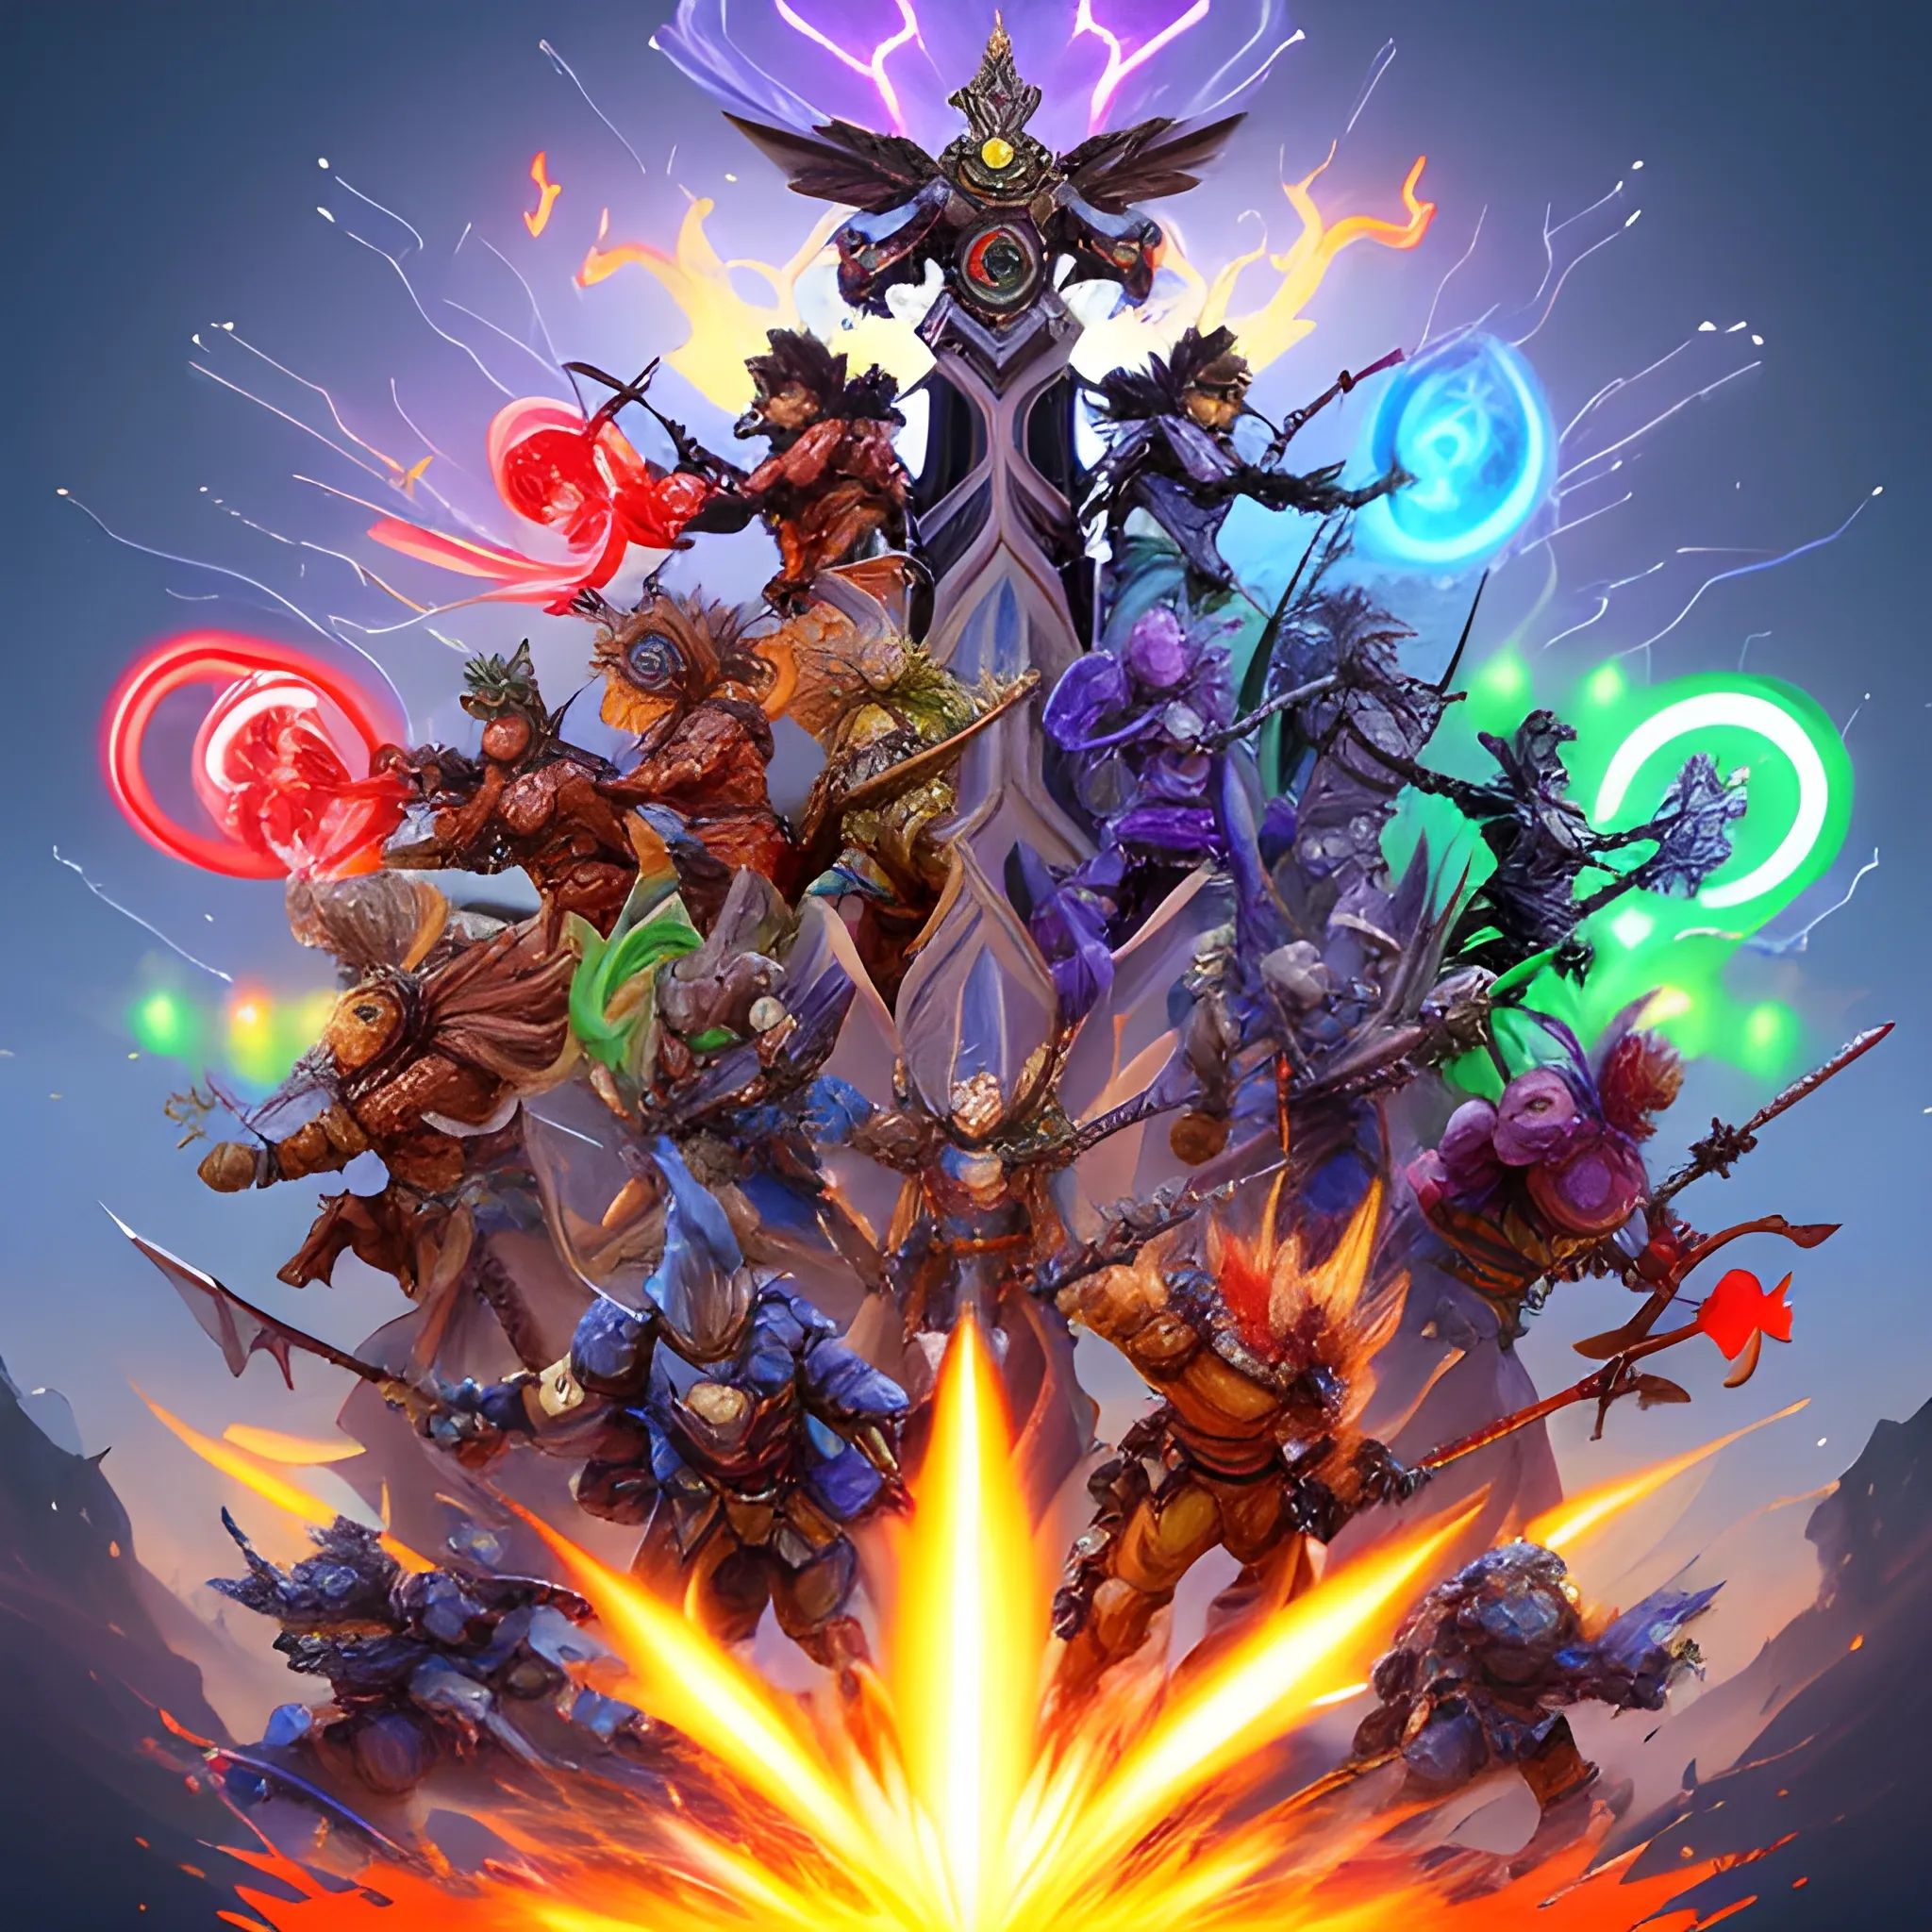 Brave warriors with diverse, colorful weapons and armor, standing heroically and determined in an anime style.Fire, ice, lightning, and other mystical elements.Cartoonish monsters such as dragons, golems, and other mythical creatures with a cute yet menacing look, surrounding the warriors.Colorful, vibrant, and cartoonish, capturing the fantasy theme of a tower defense game.Full of action and excitement, with sparks flying and magical effects lighting up the scene.